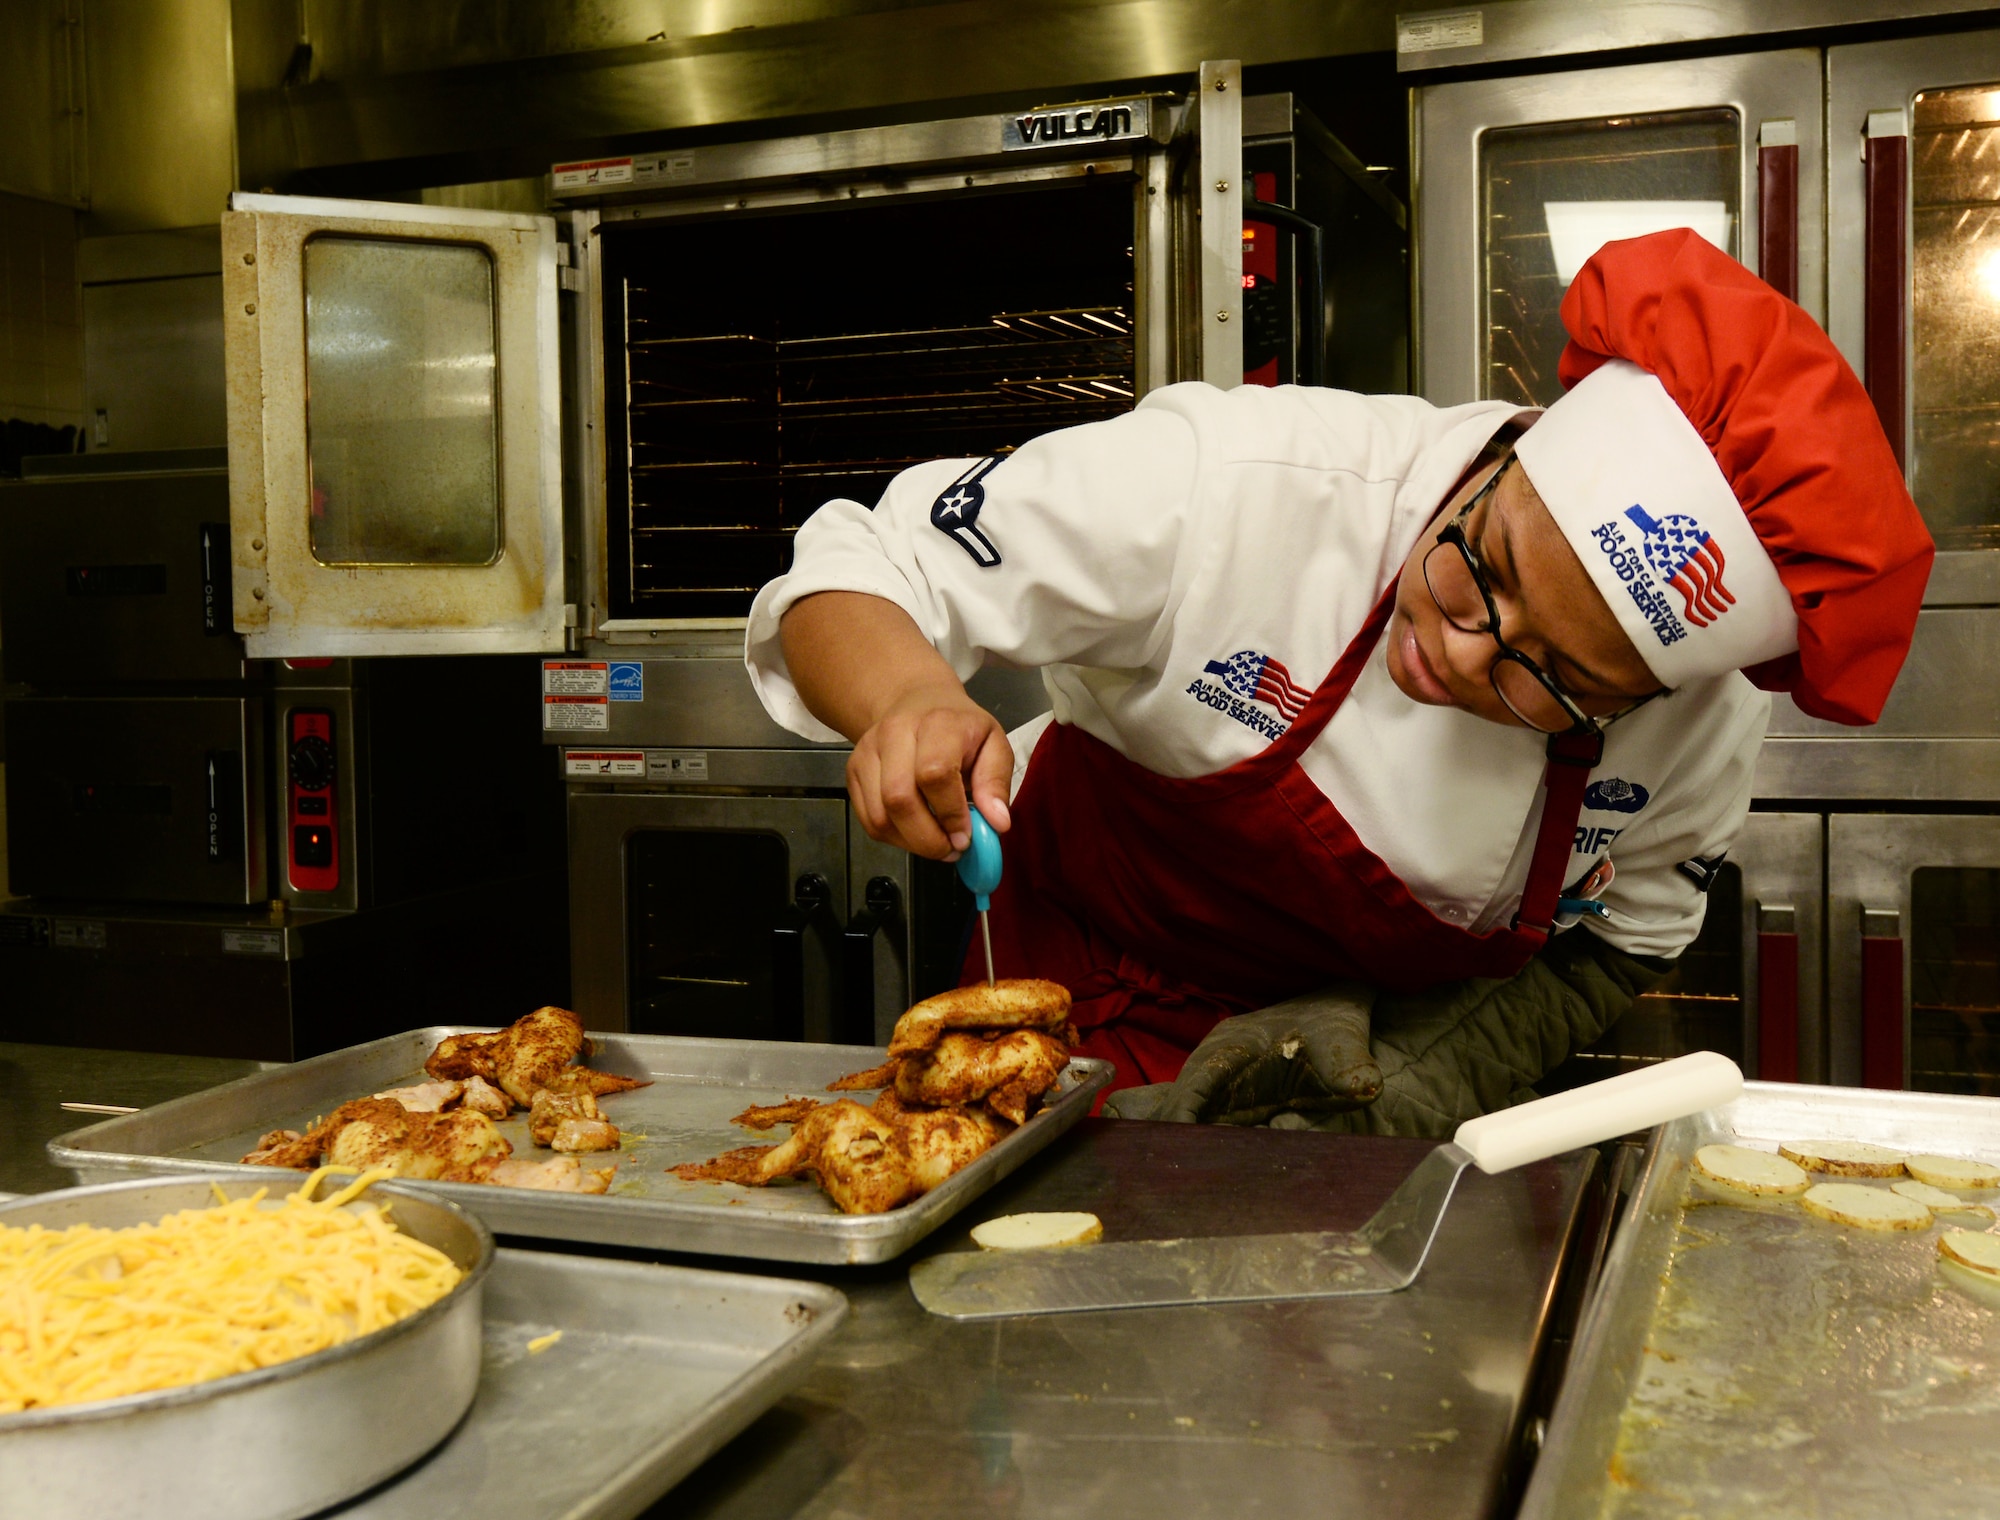 Airman Aminah Griffin, 55th Force Support Squadron Sustainment Flight food service apprentice, checks the temperature of her chicken during a top chef competition inside the King dining facility May 31, 2018 at Offutt Air Force Base, Nebraska. Each team had 20 minutes to create an appetizer and 30 minutes for each entrée and dessert. (U.S. Air Force photo by Charles J. Haymond)